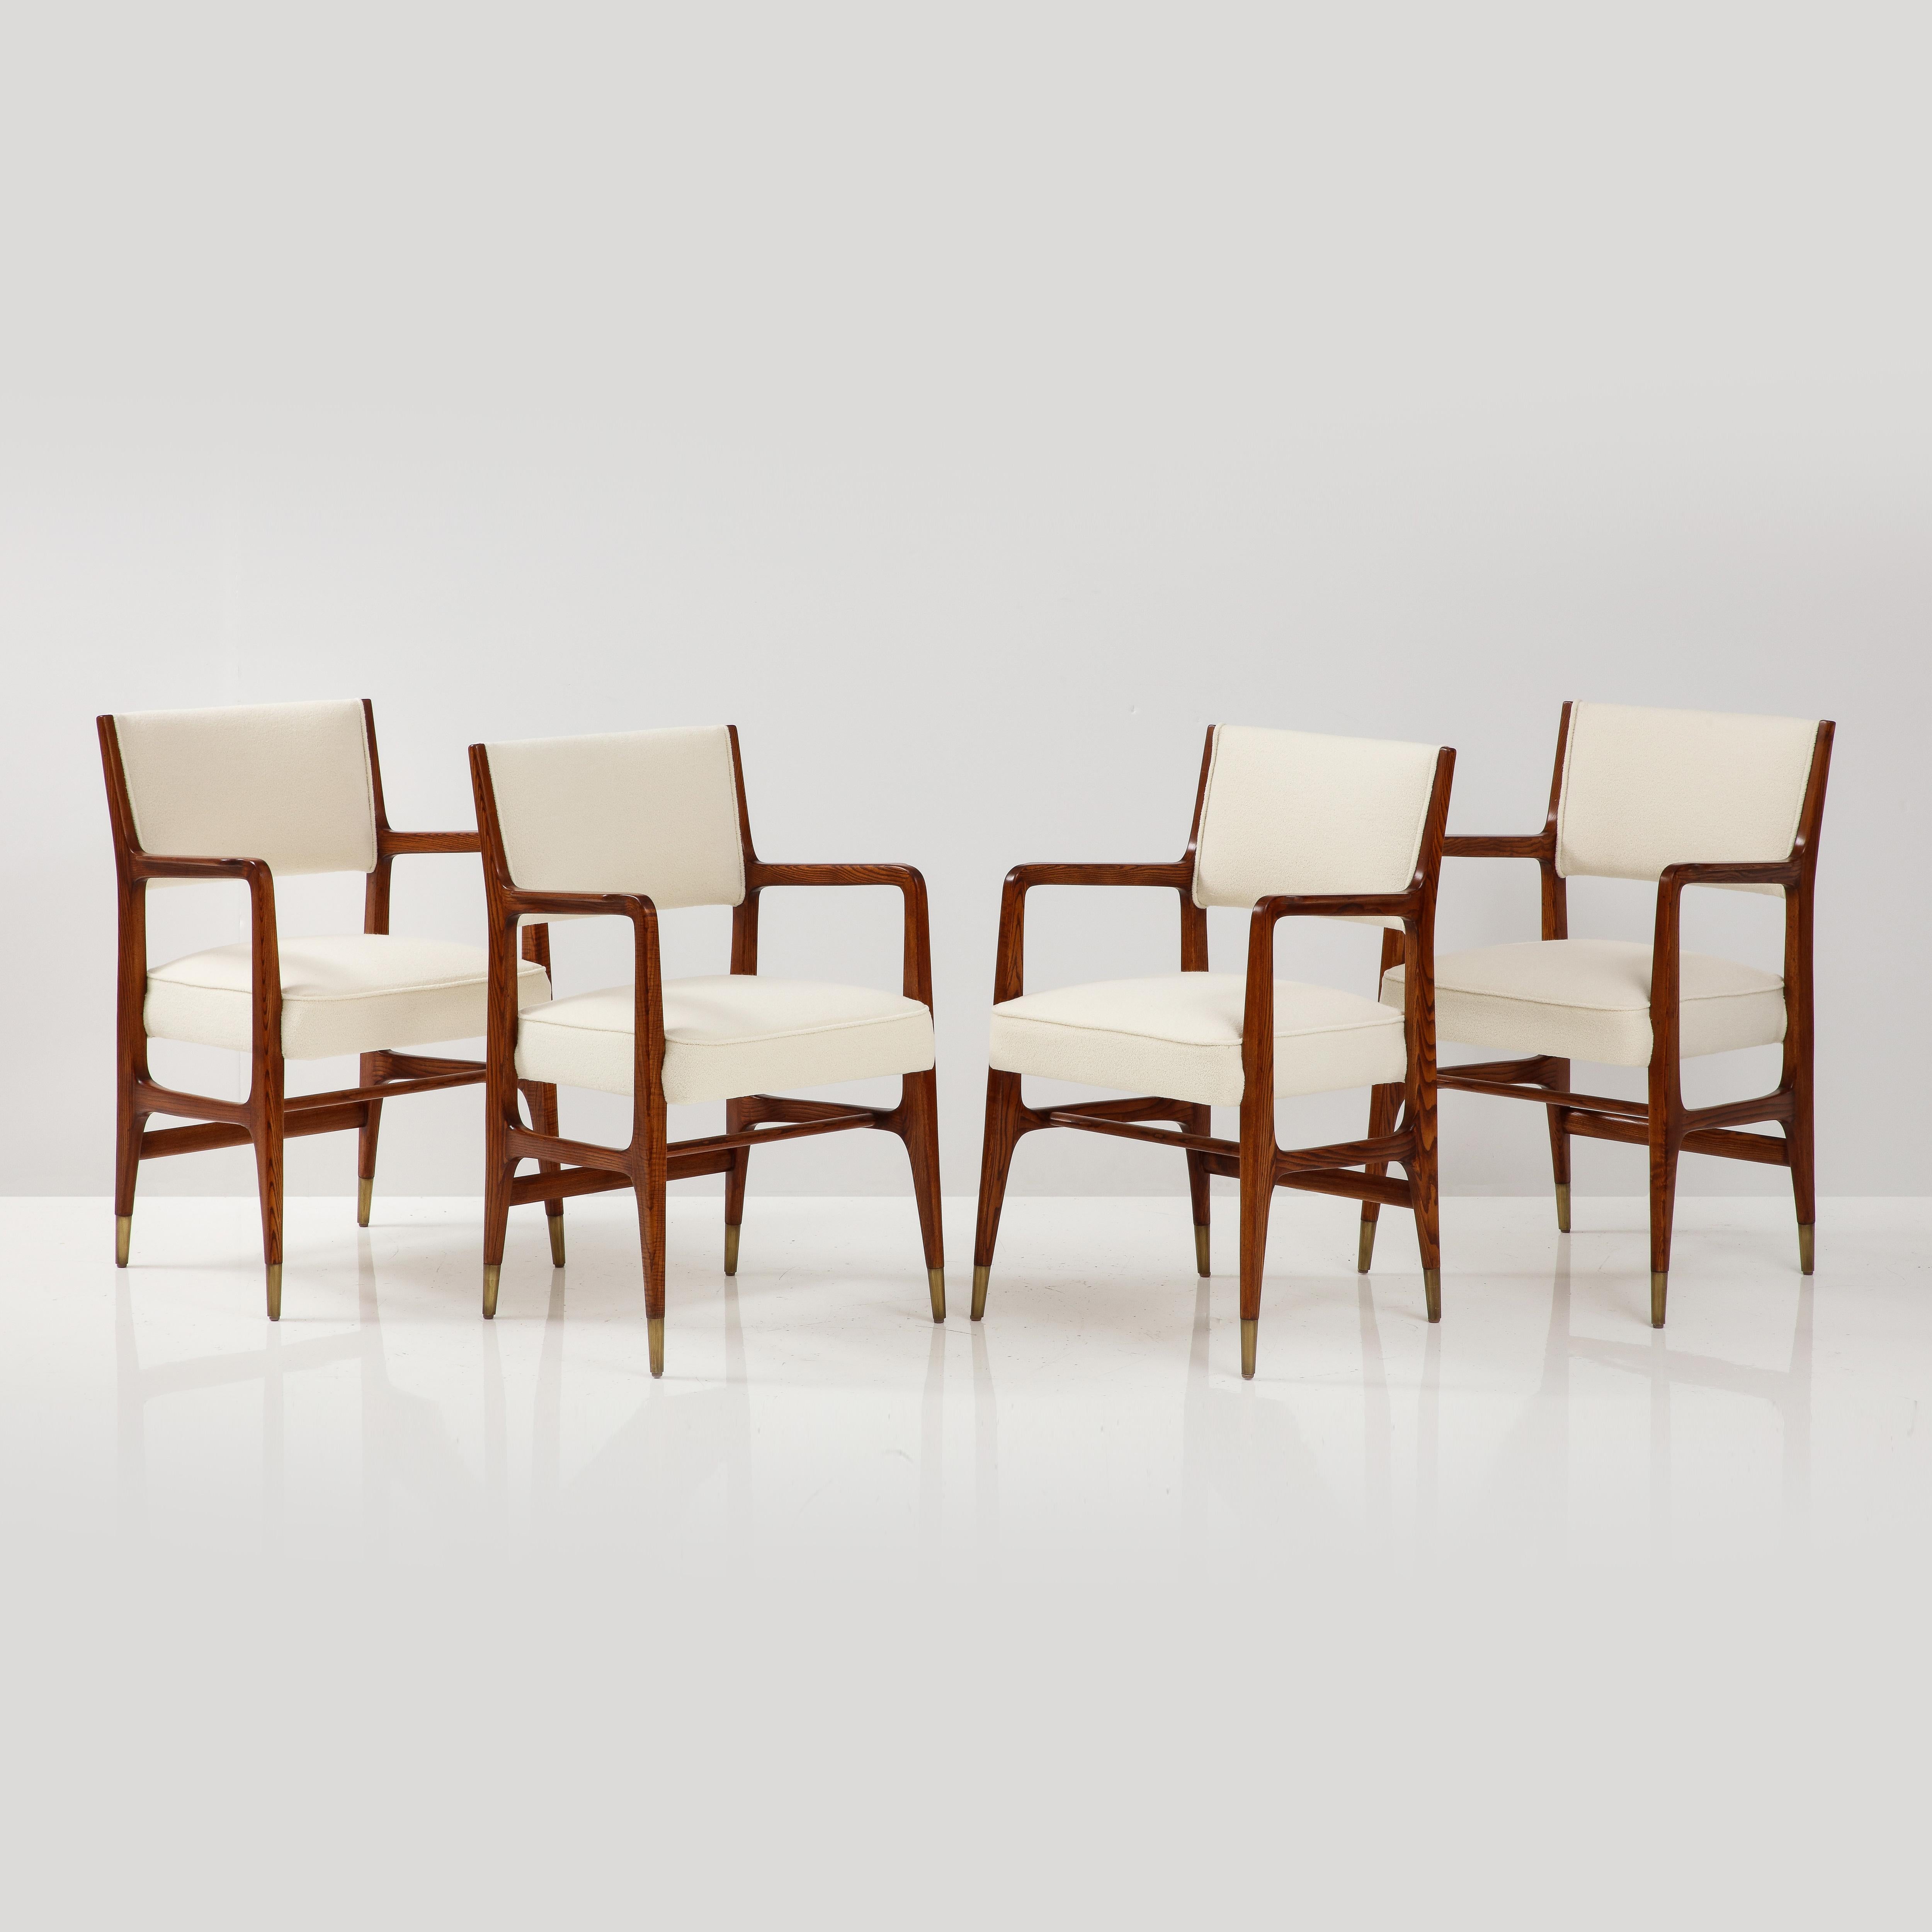 Mid-20th Century Gio Ponti for Cassina Rare Set of 8 Dining Chairs Model 110 in Ivory Bouclé